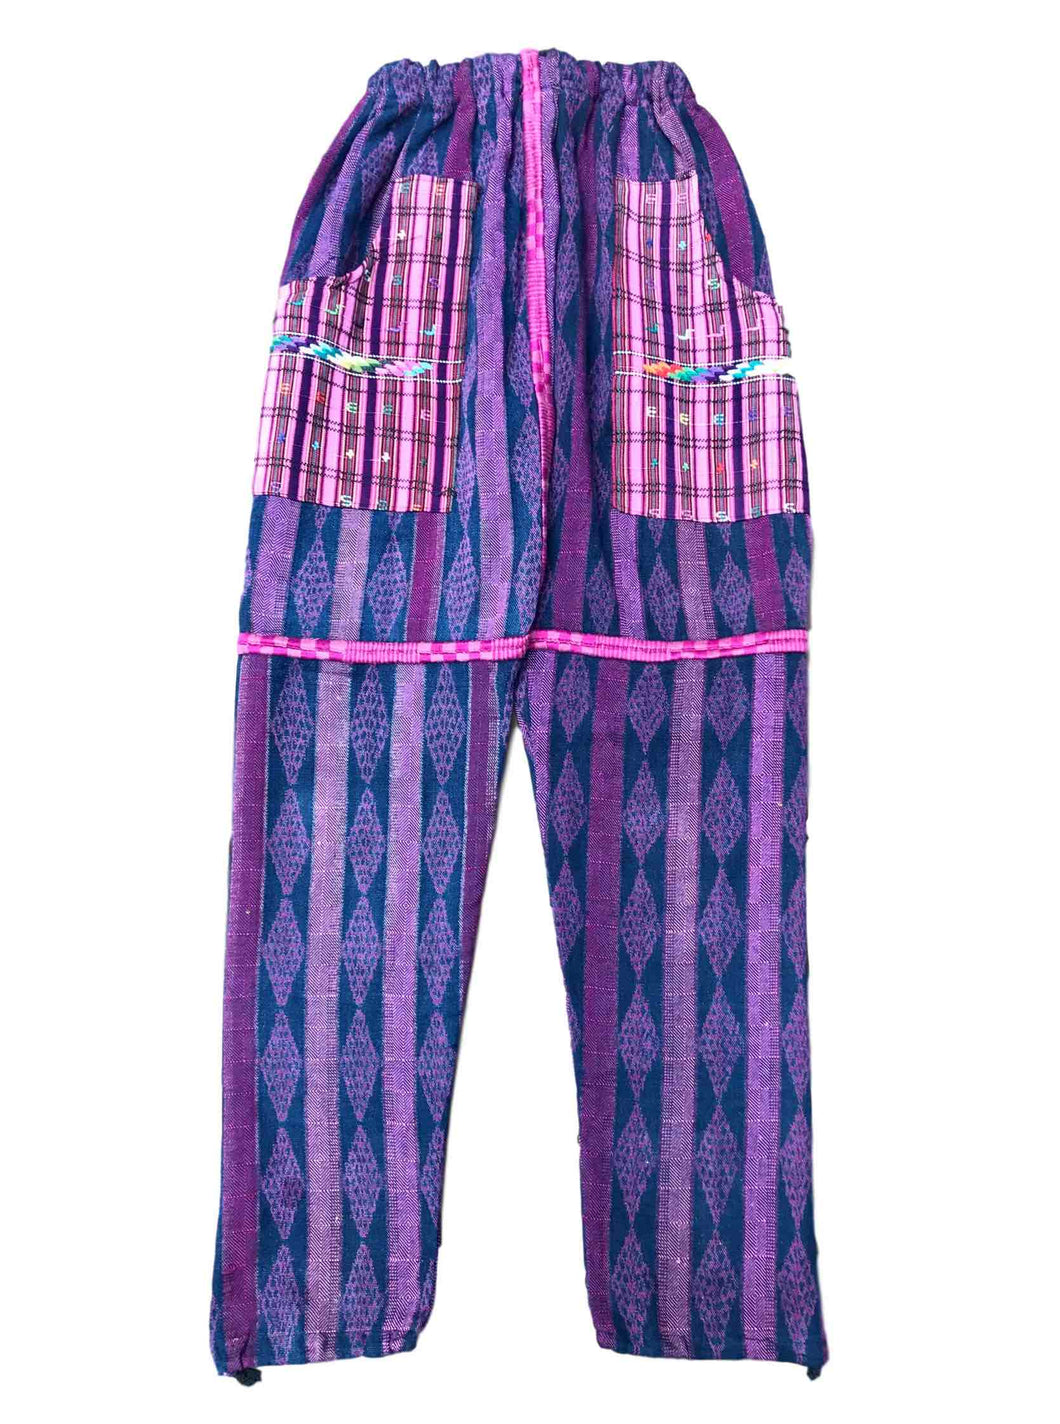 Guatemalan Corte Style Pants with Huipil Pockets - Purple & Pink - Fair Trade Gypsy